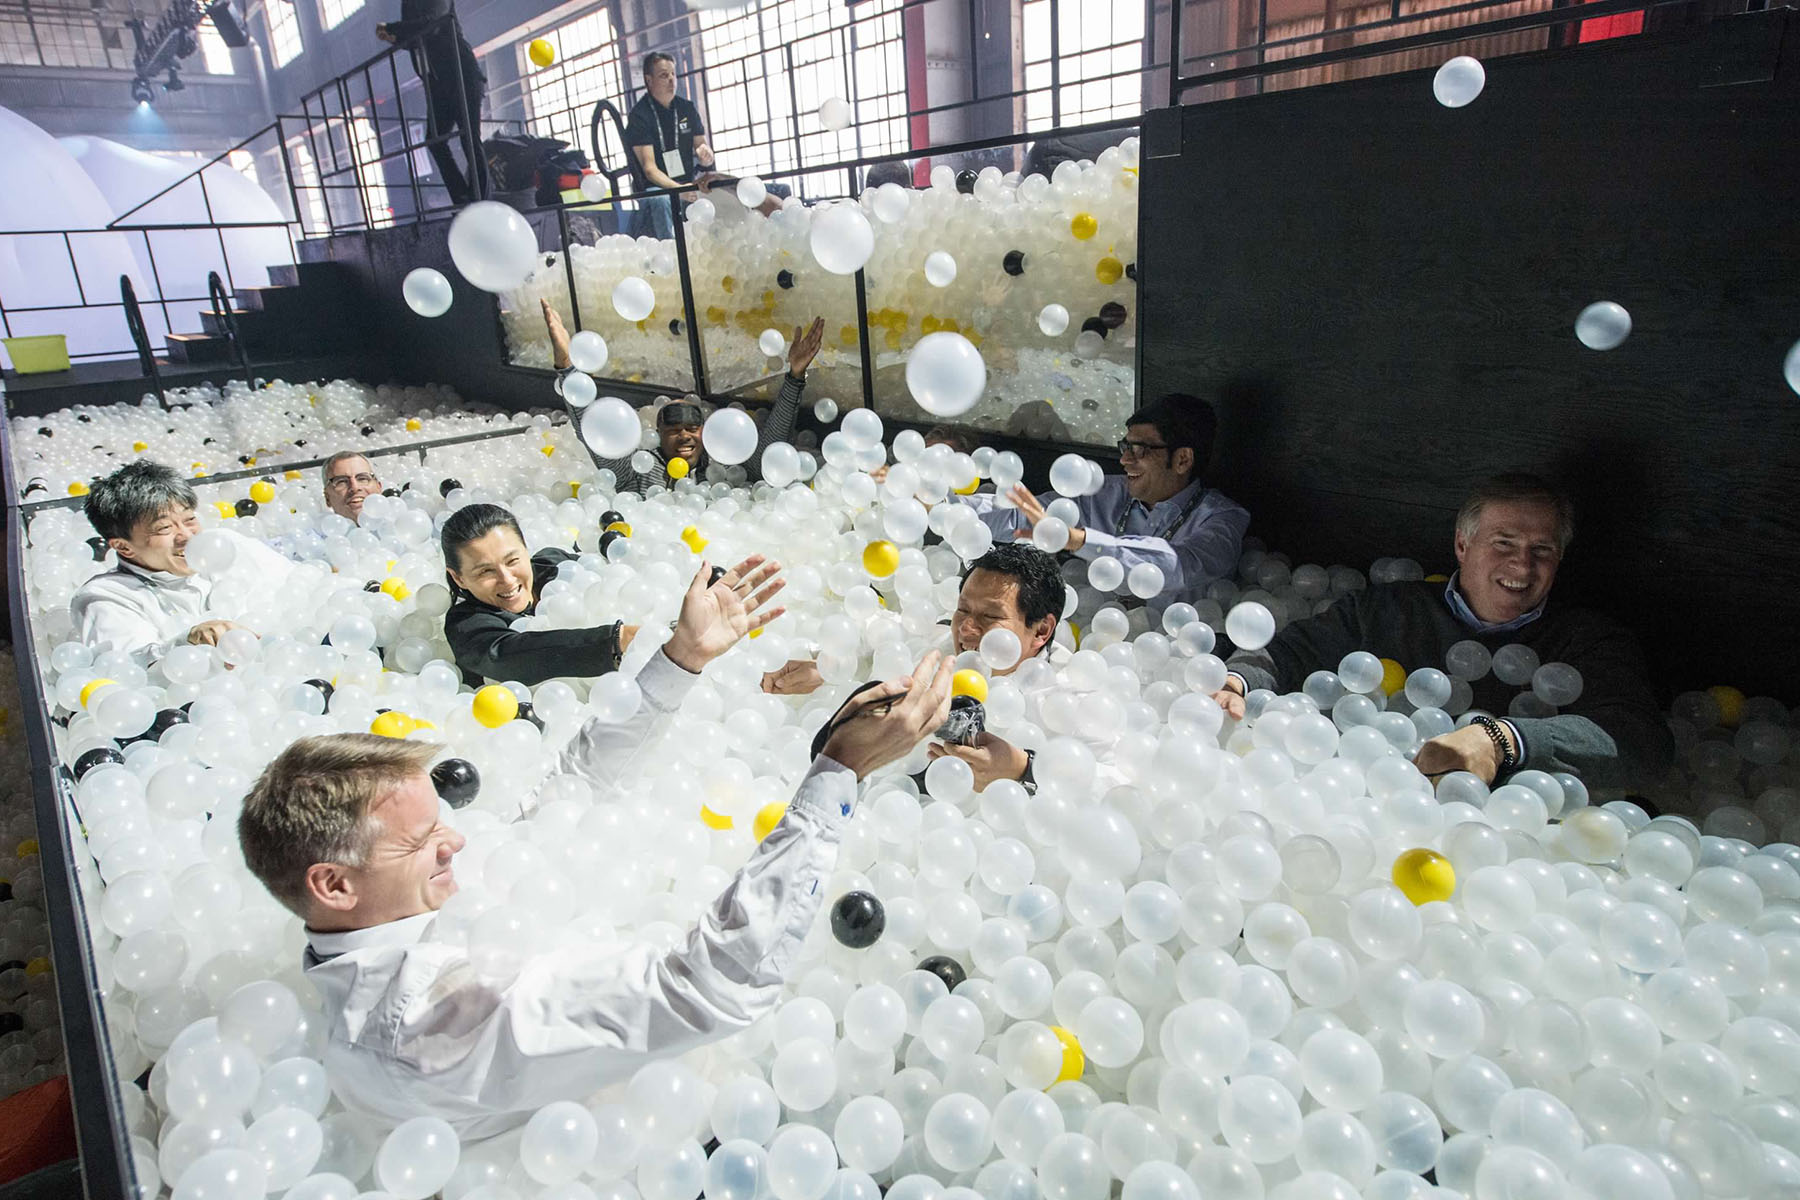 Innovation realized attendees in a ball pool